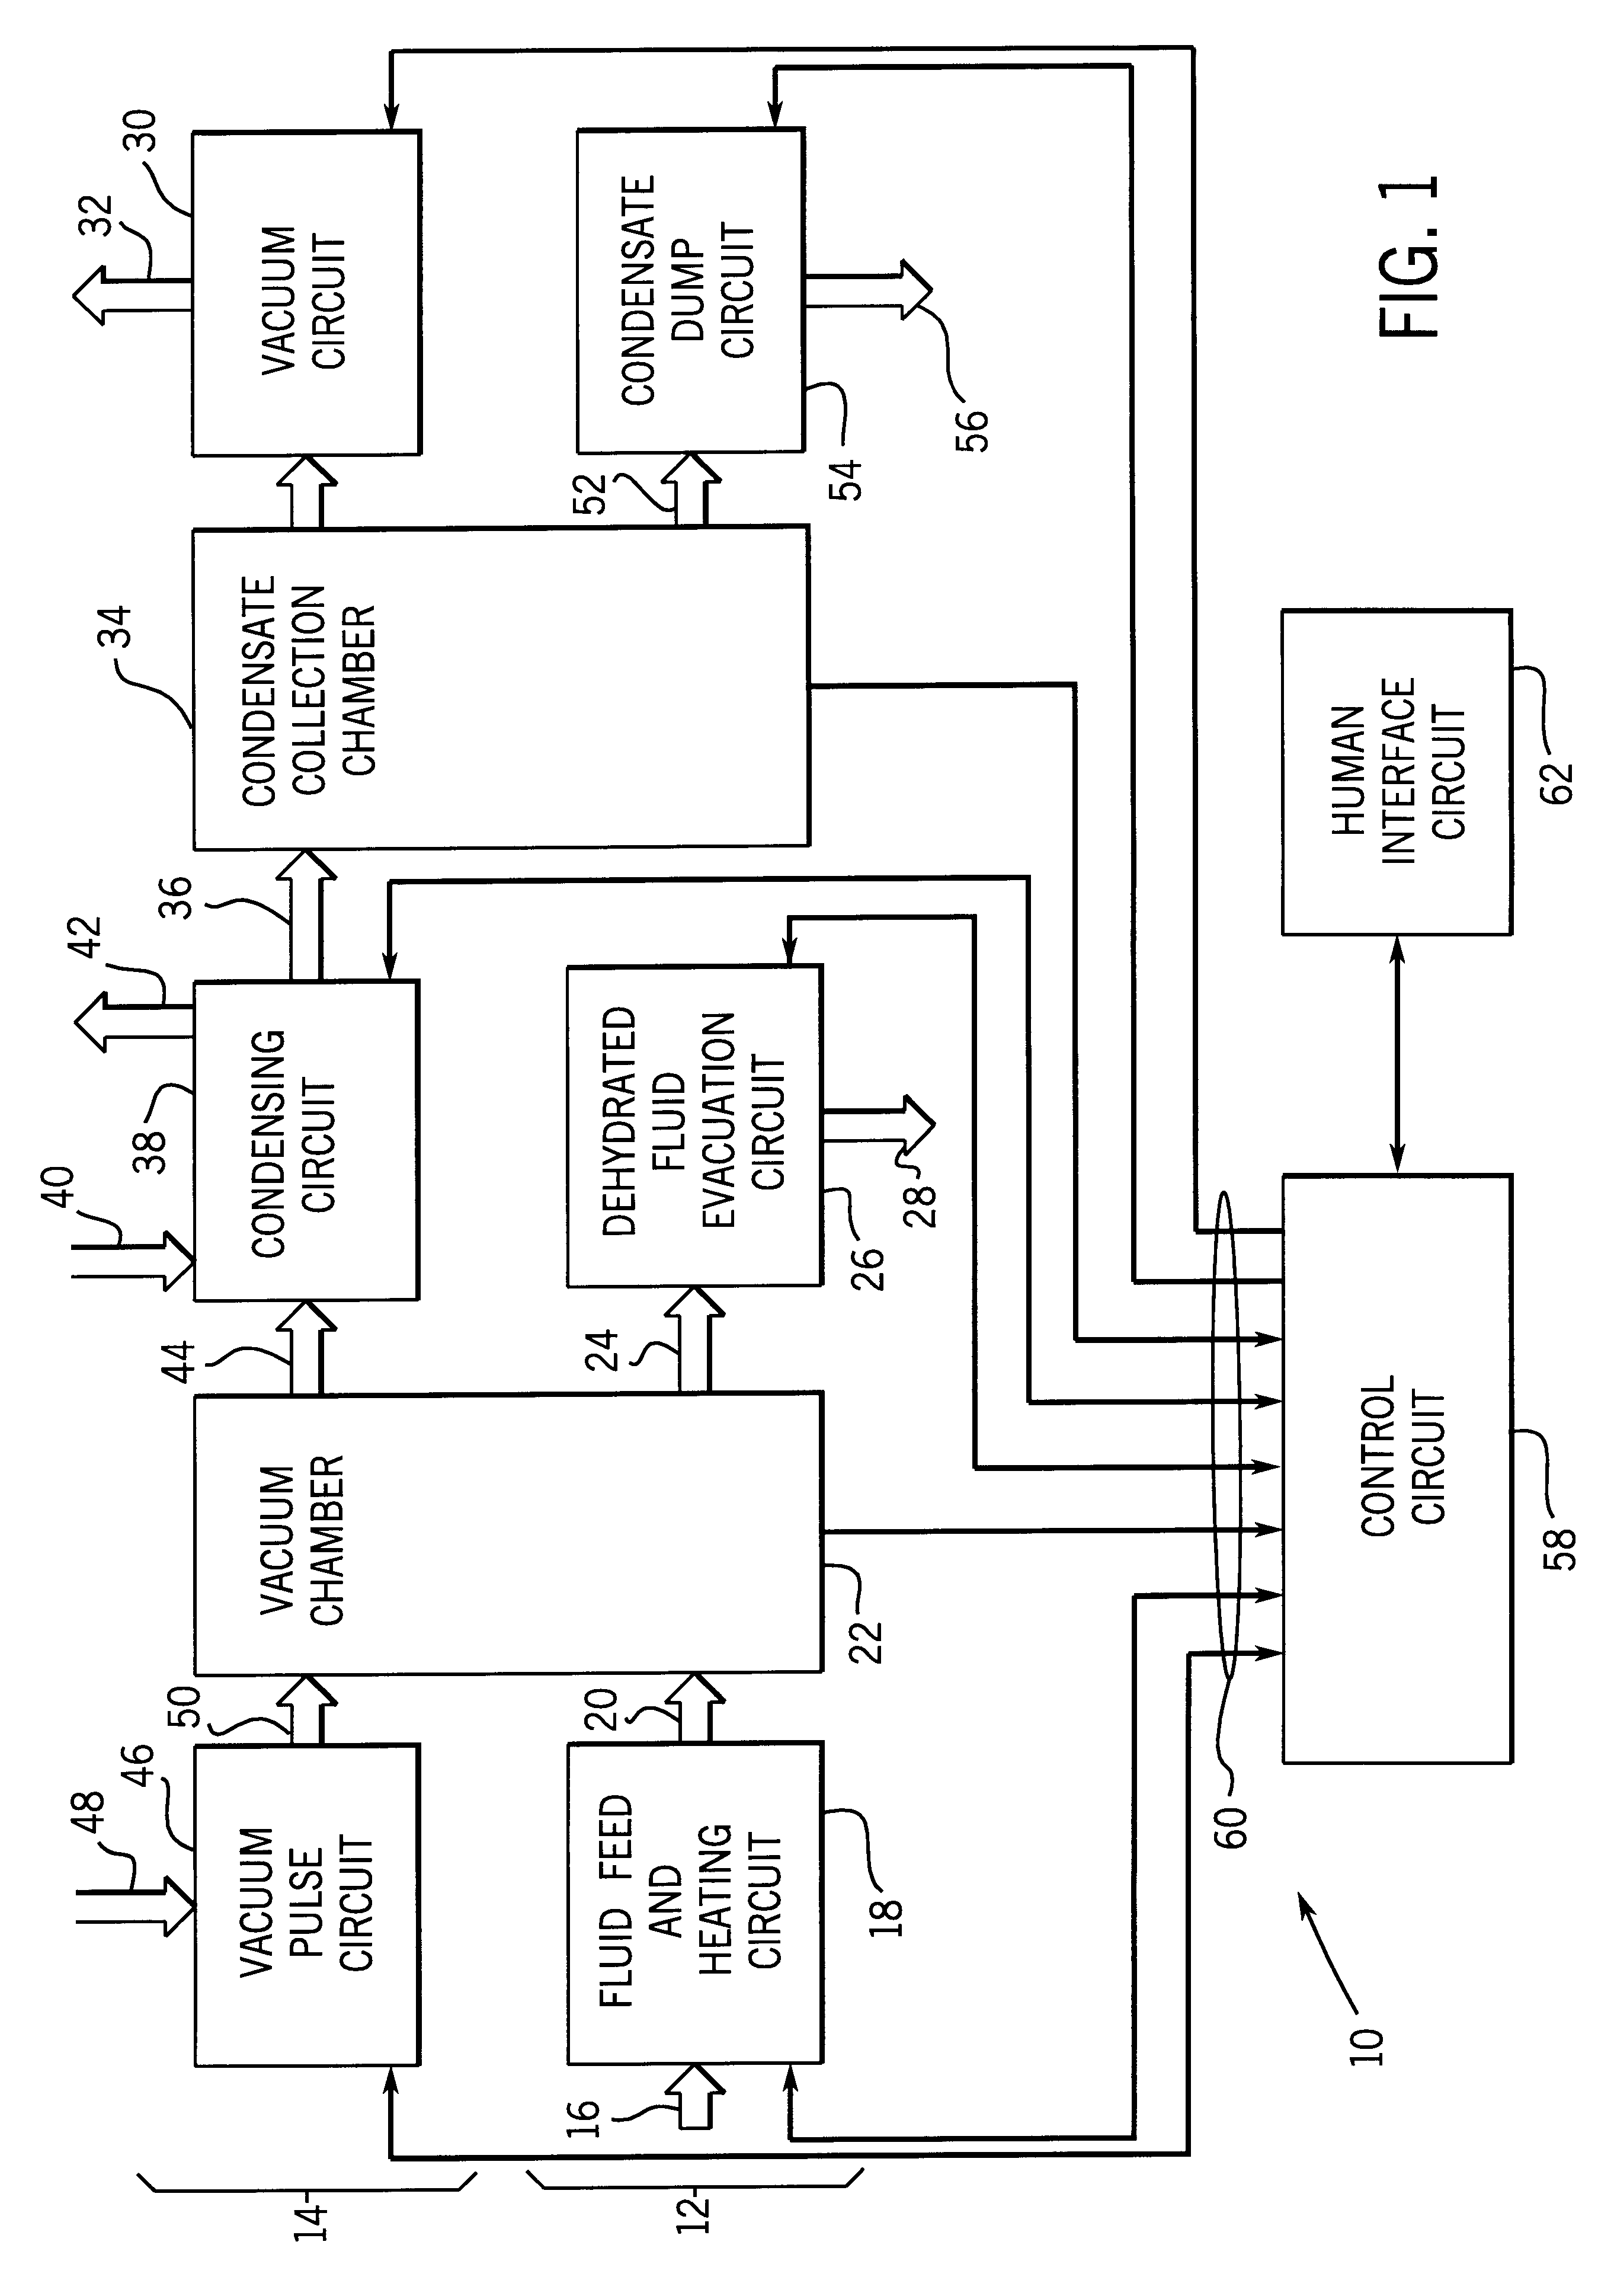 Apparatus for dehydrating oil